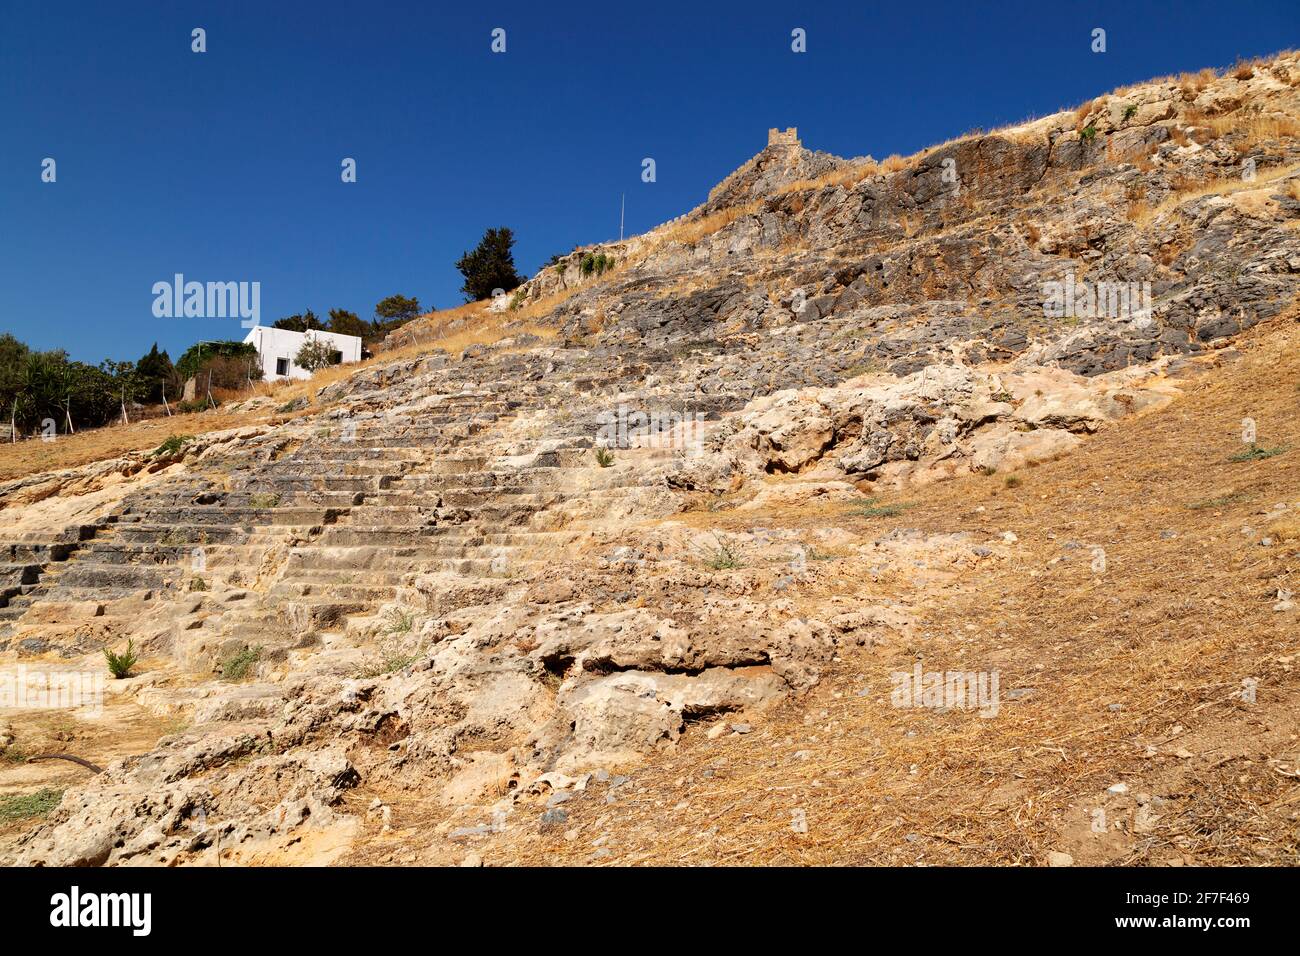 Seating in the ancient theatre at the foot of the Lindian Acropolis in Lindos, on Rhodes, Greece. The venue was used as a place of entertainment. Stock Photo